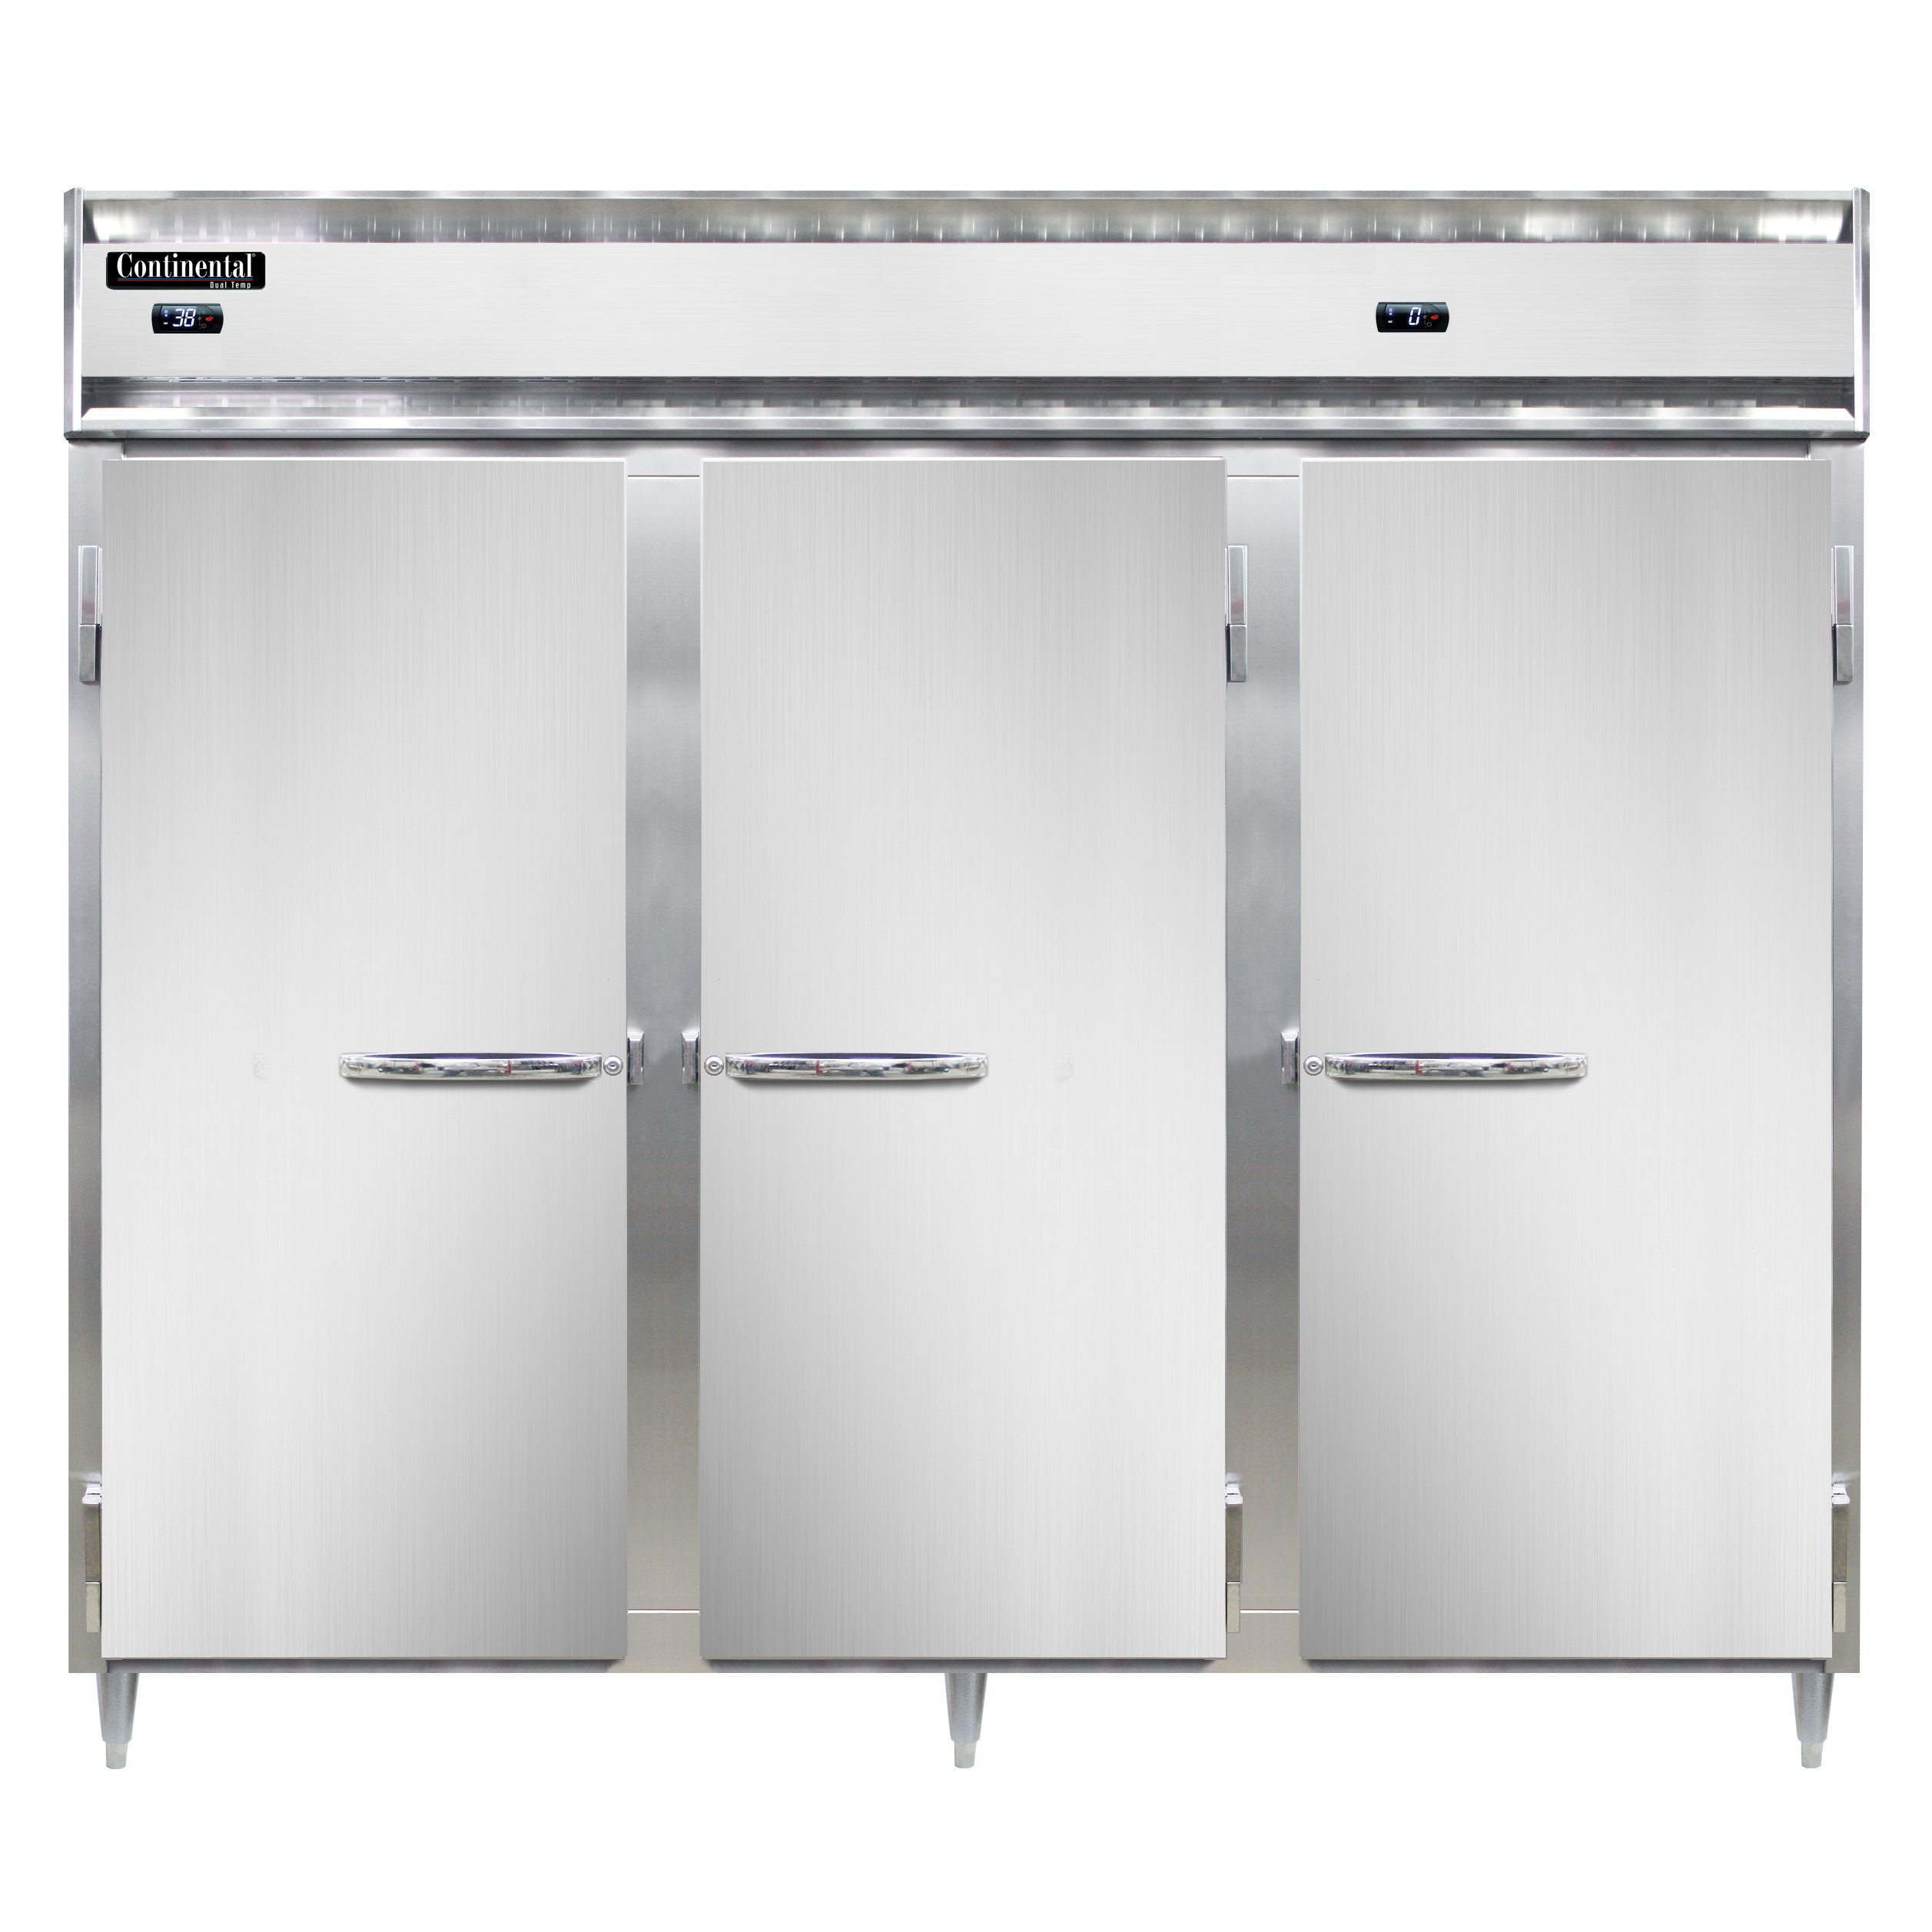 Continental Refrigerator D3RRFEN Reach-In Refrigerator Freezer w/ 3-Section, 3 Solid Full Doors